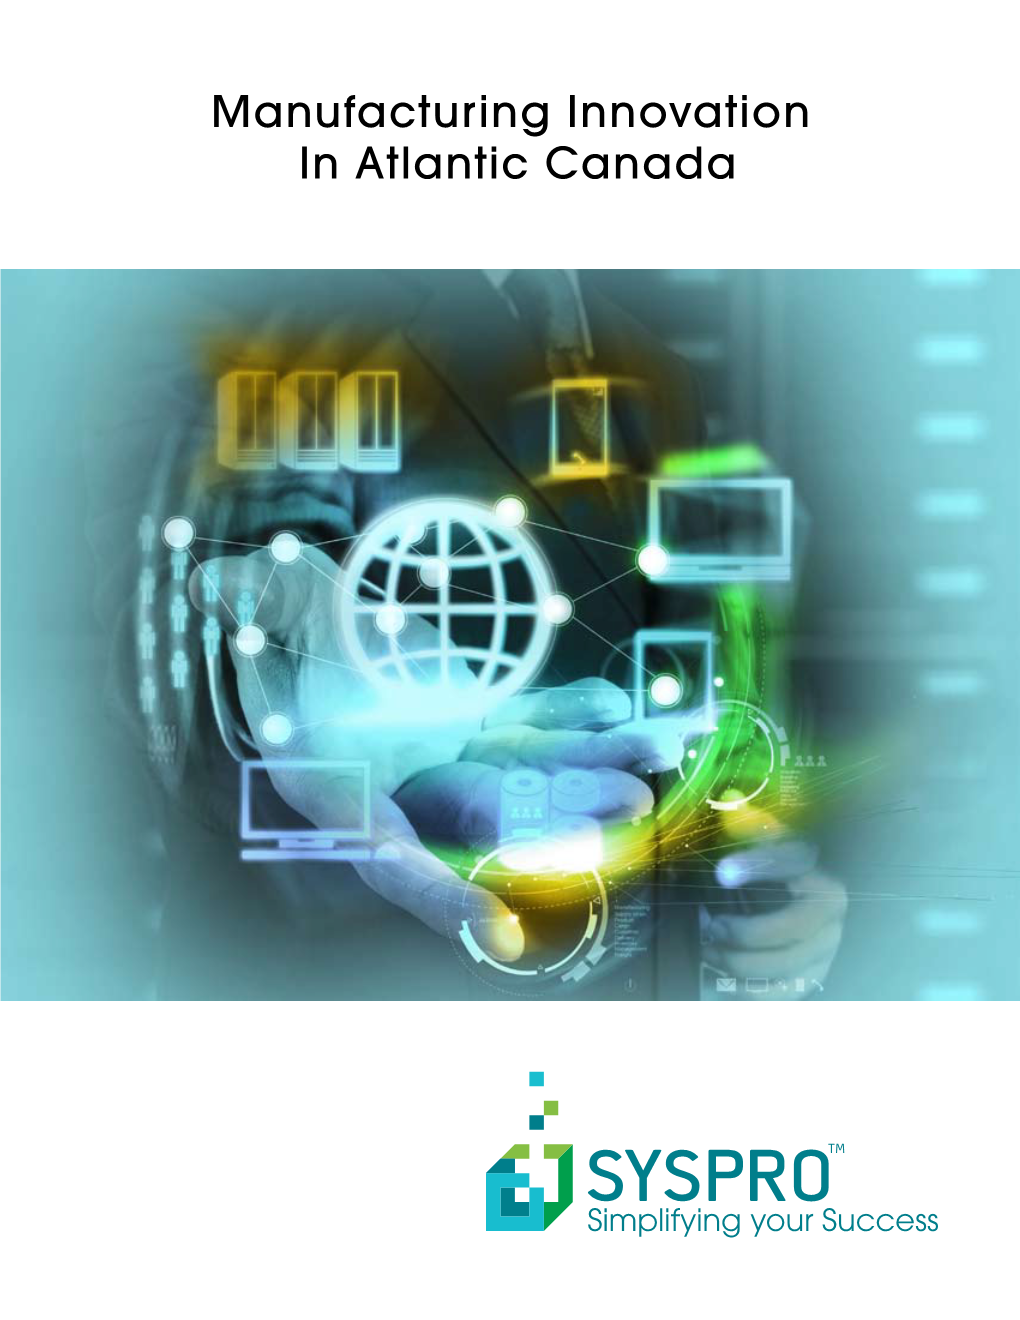 Manufacturing Innovation in Atlantic Canada Executive Contents Summary